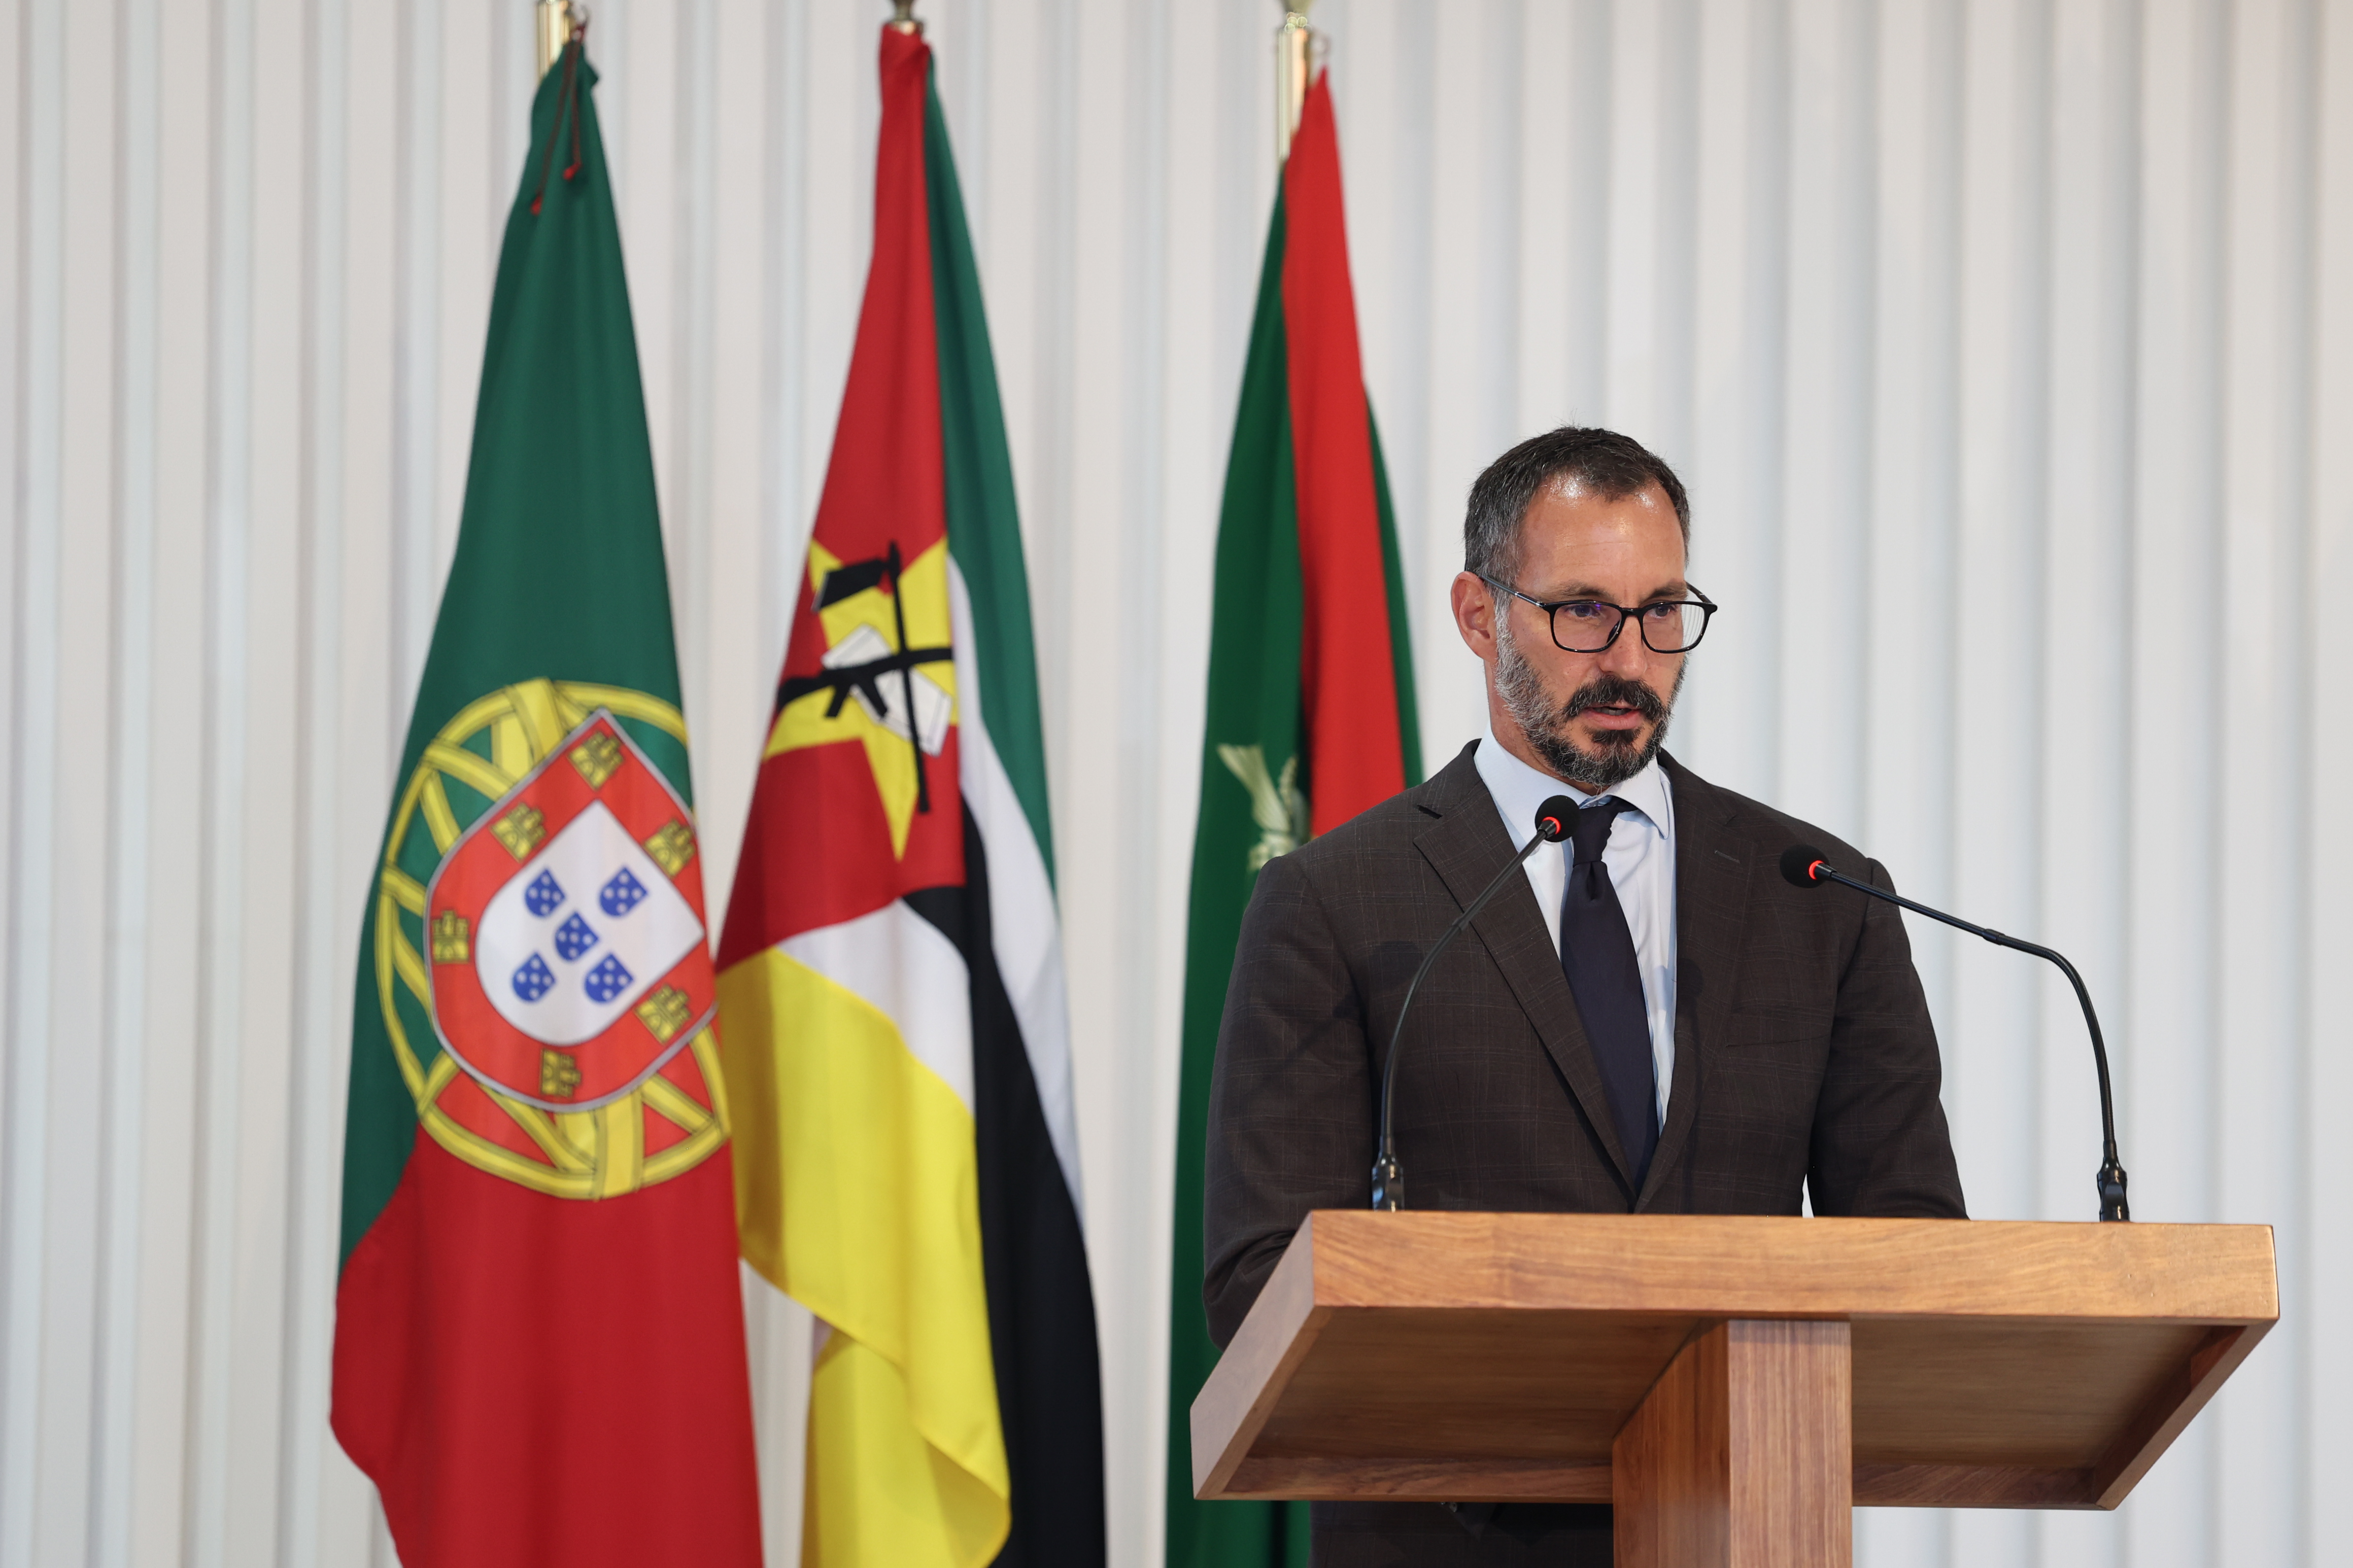 Prince Rahim Aga Khan addressing guests at the inauguration of the Aga Khan Academy Maputo on 19 March 2022